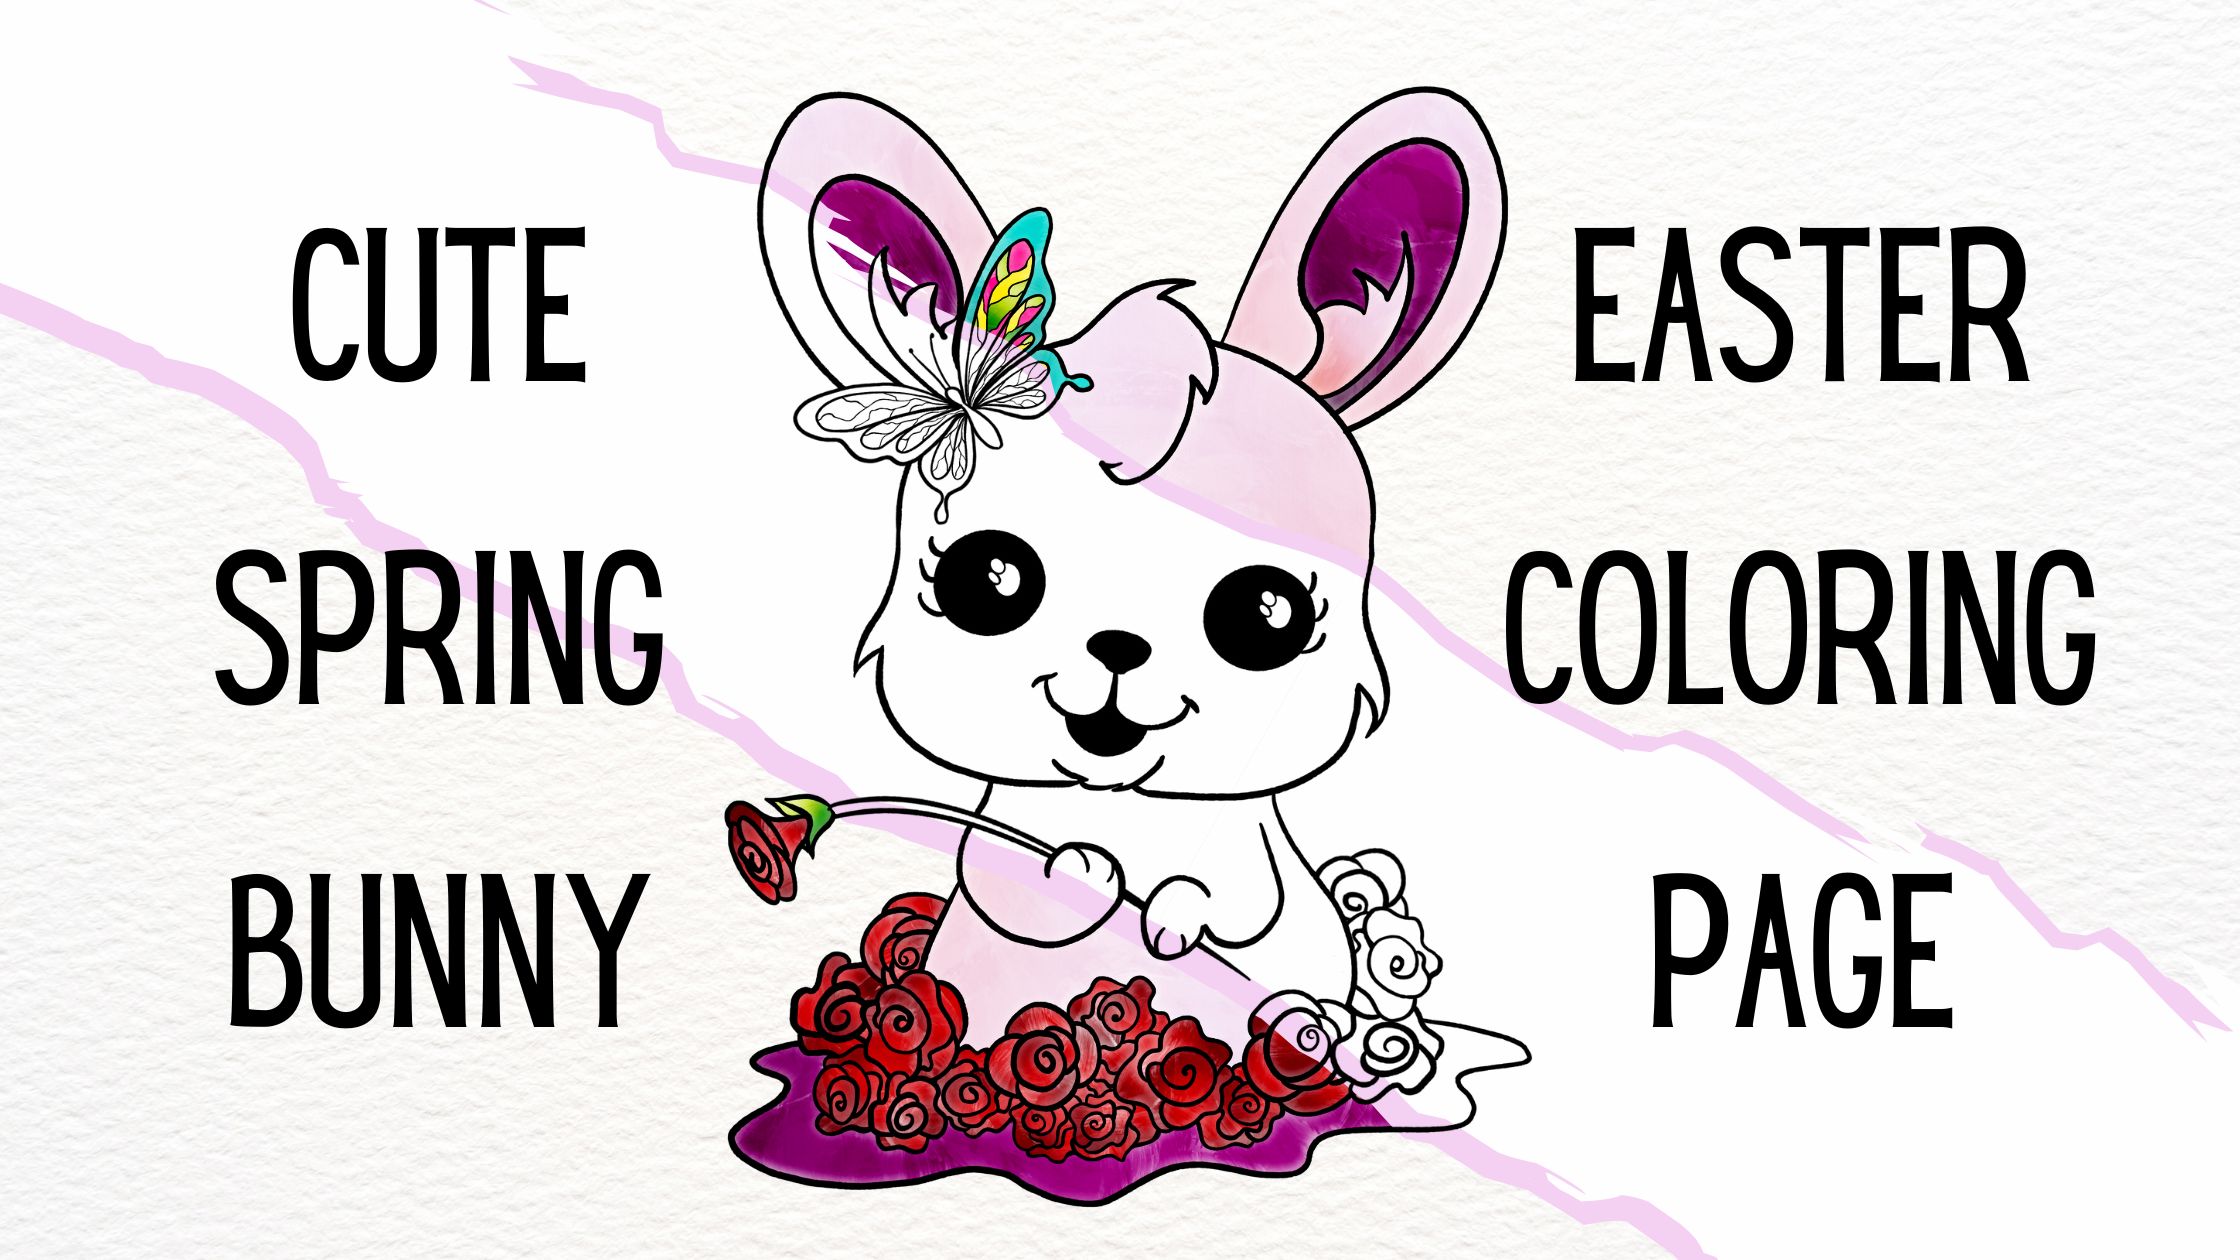 Cute Spring Bunny Easter Coloring Page Activity